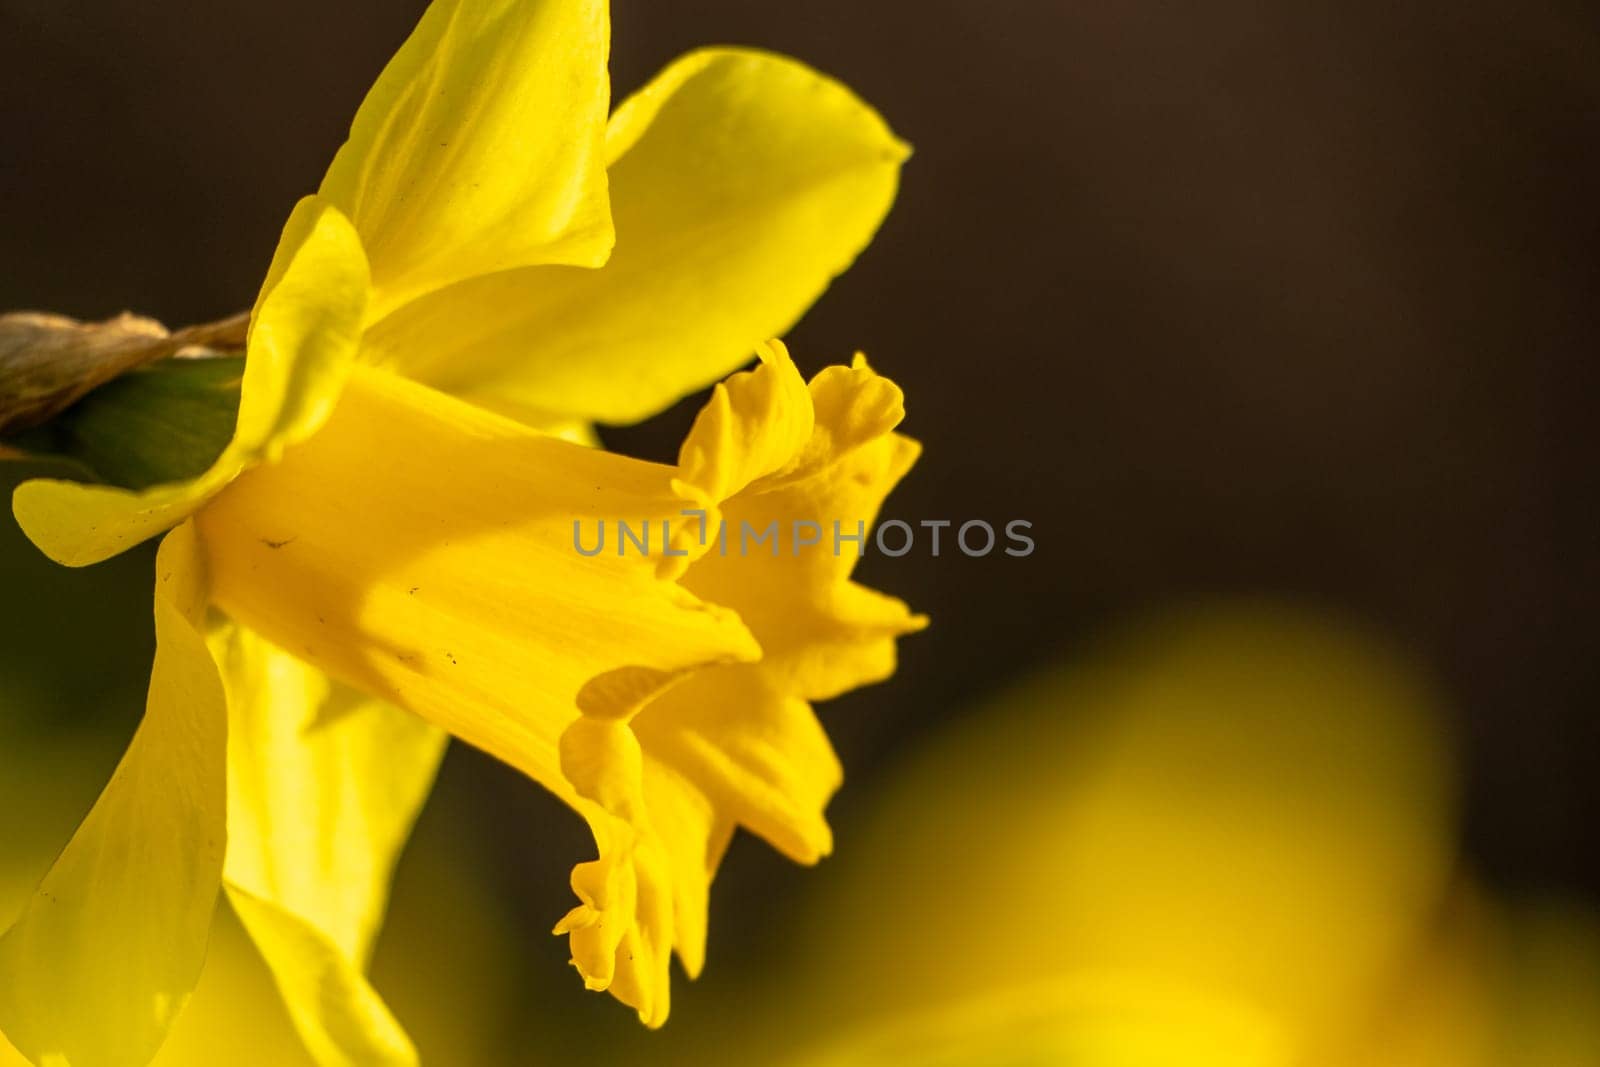 A bunch of yellow flowers with a blurry background. The flowers are in full bloom and are the main focus of the image. by Matiunina